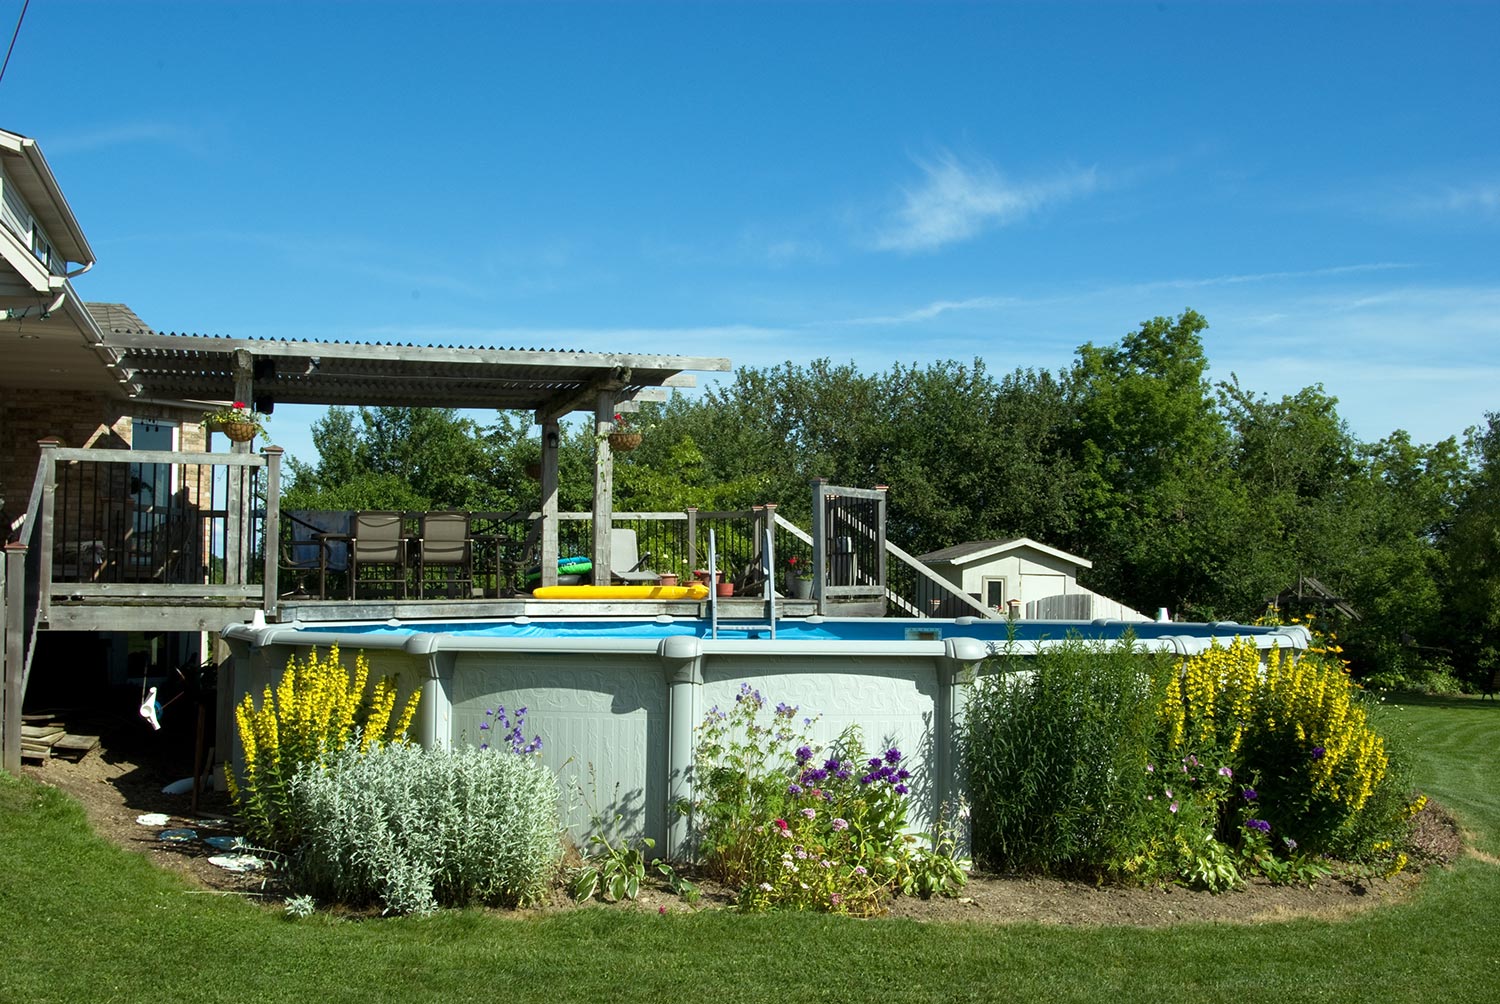 A backyard deck and above ground swimming pool